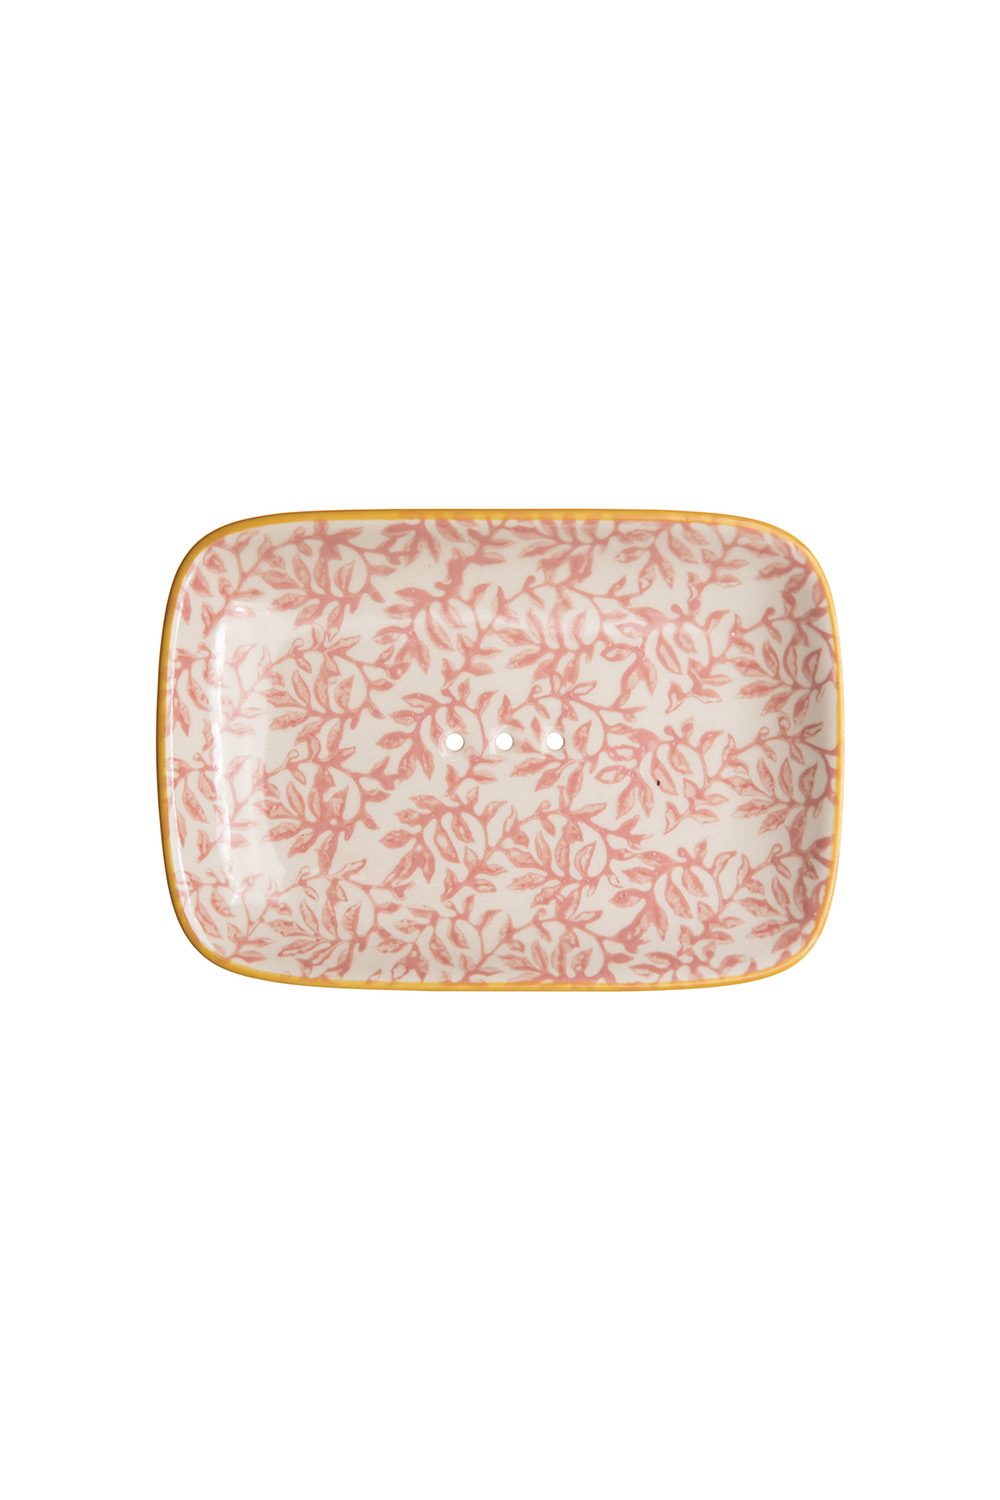 Tranquillo Soap Dish - Floral - Sustainable